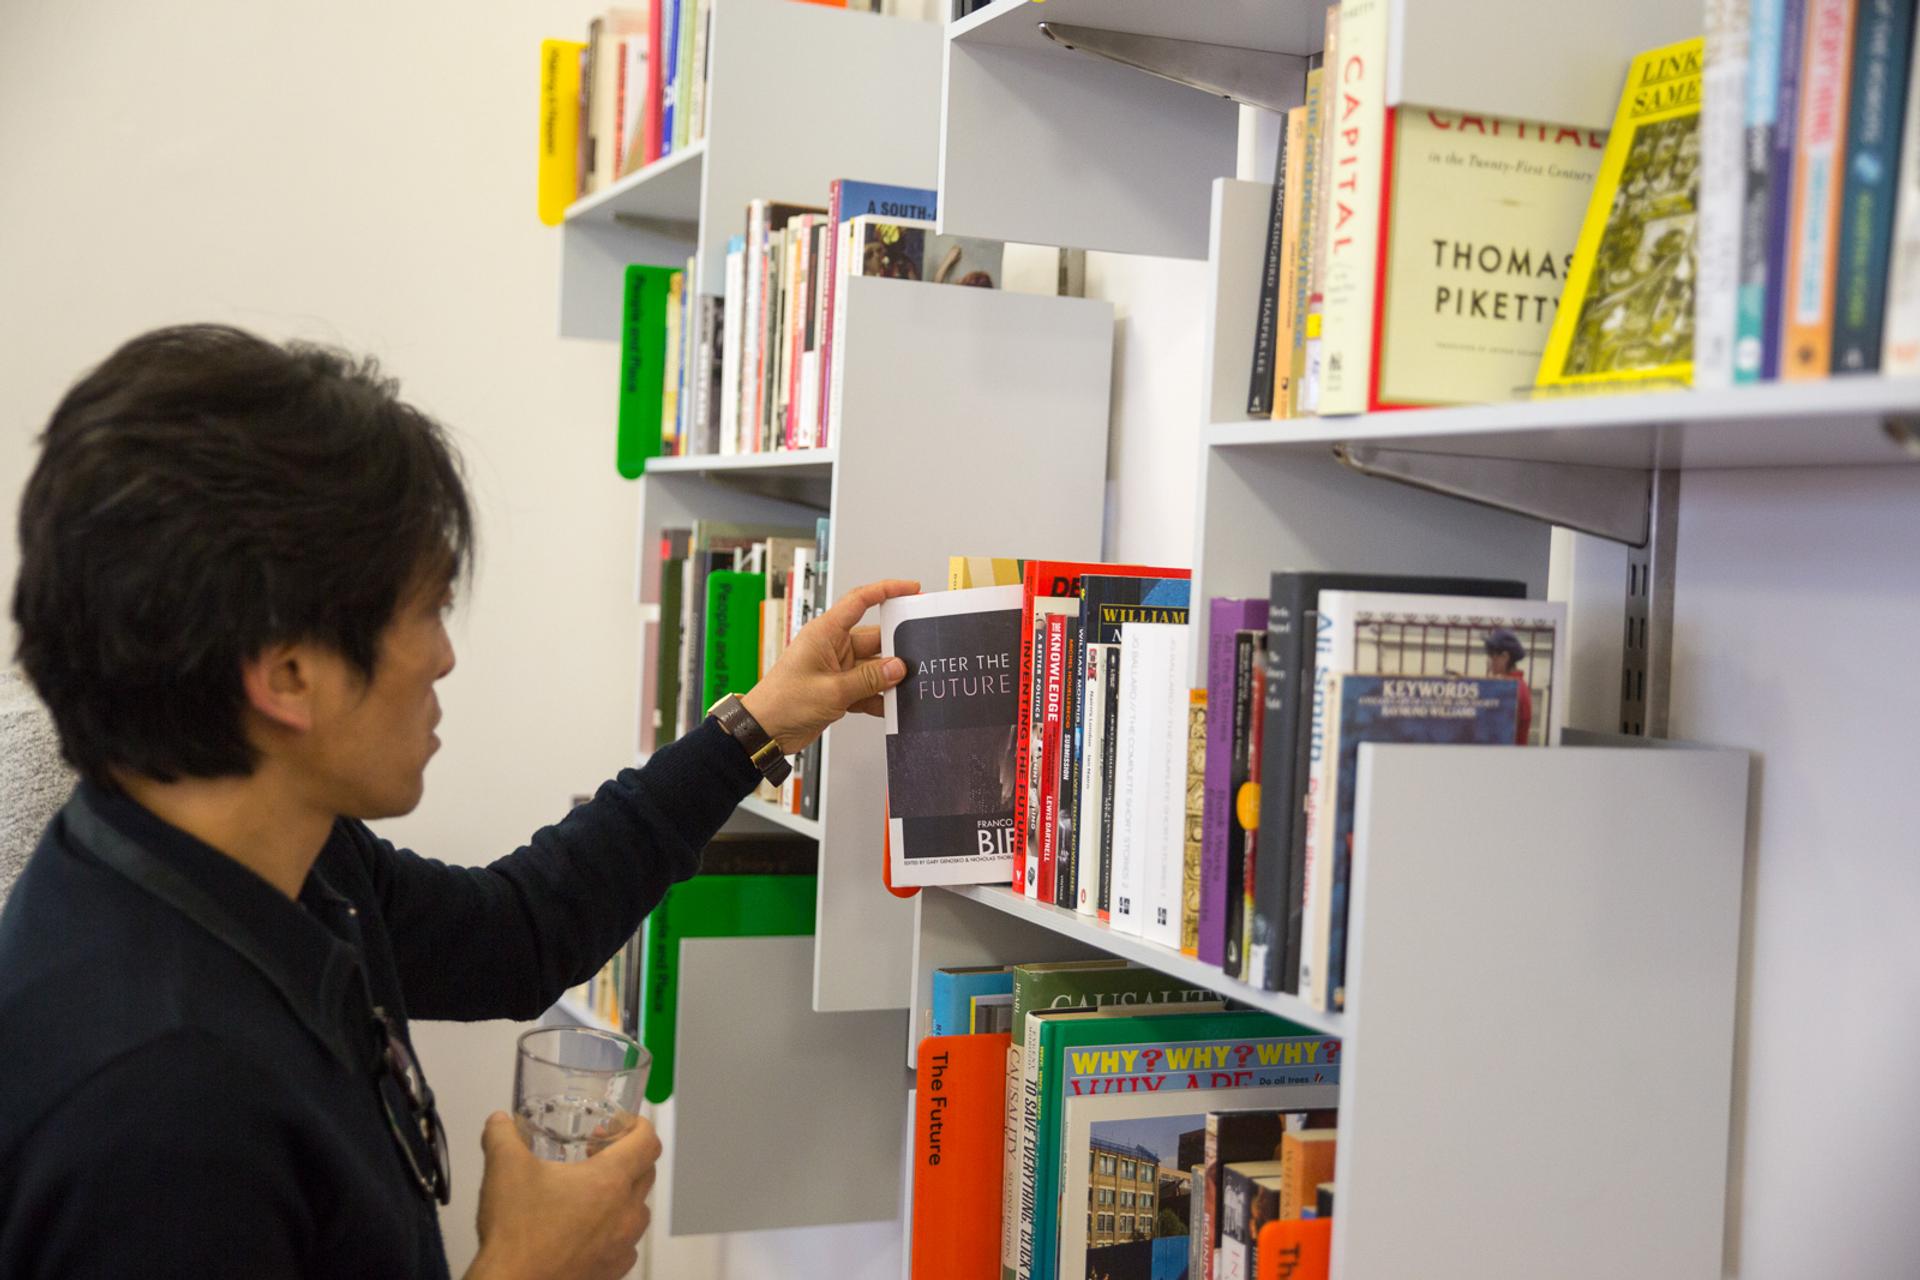 On the right, grey wallmounted shelves full of books. On the left, a man with dark hair and shirt, holding a glass and browsing the books